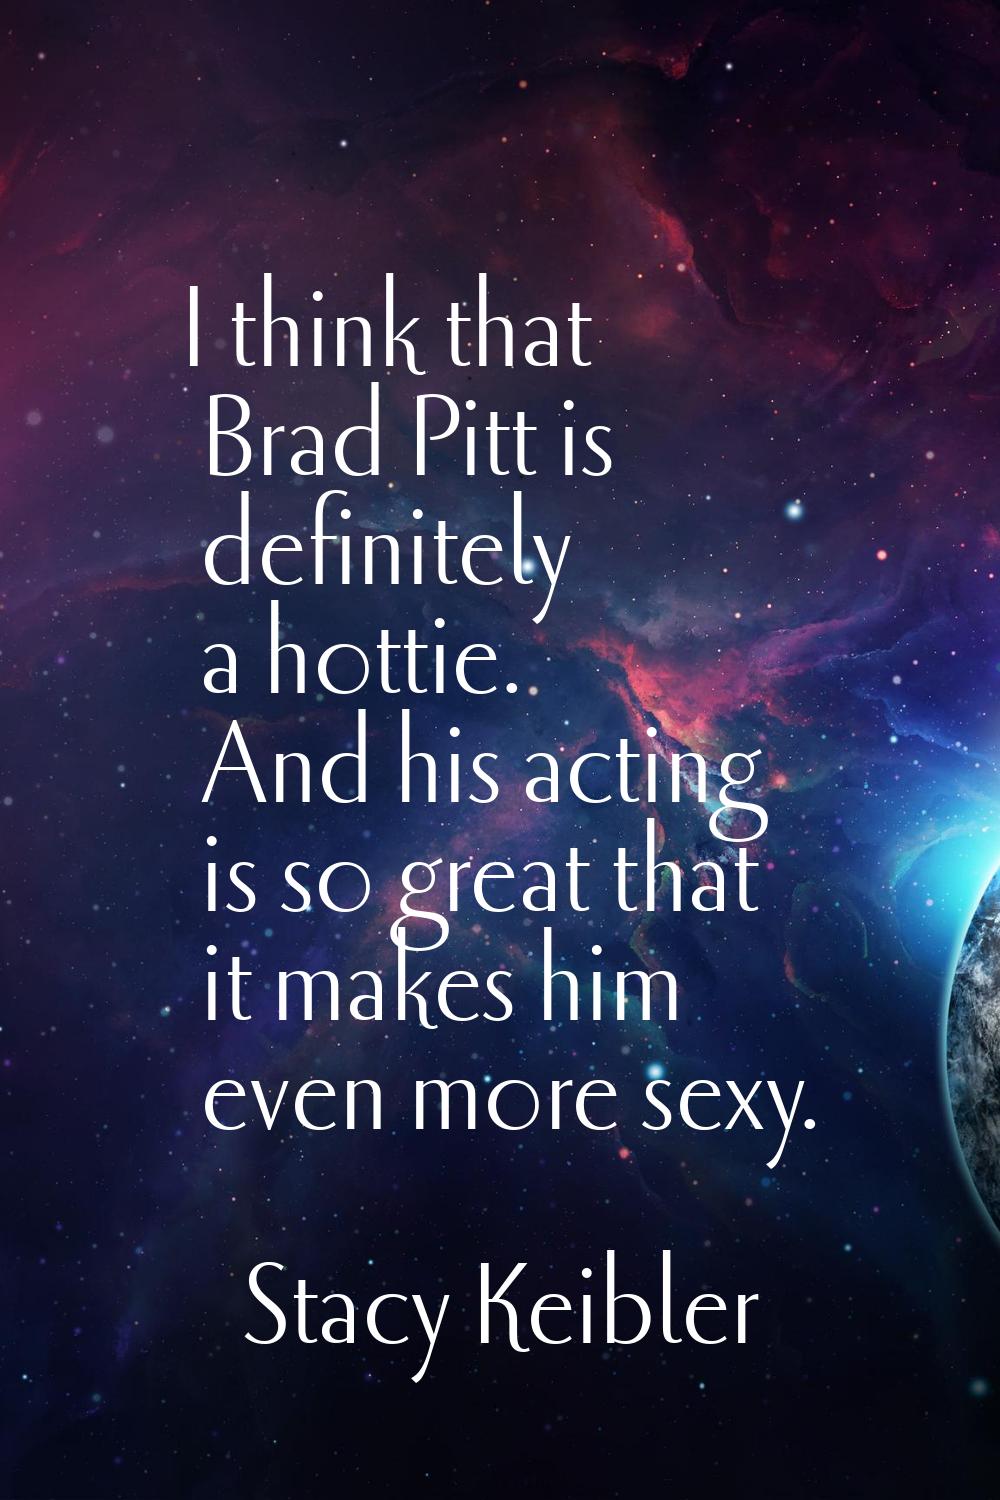 I think that Brad Pitt is definitely a hottie. And his acting is so great that it makes him even mo